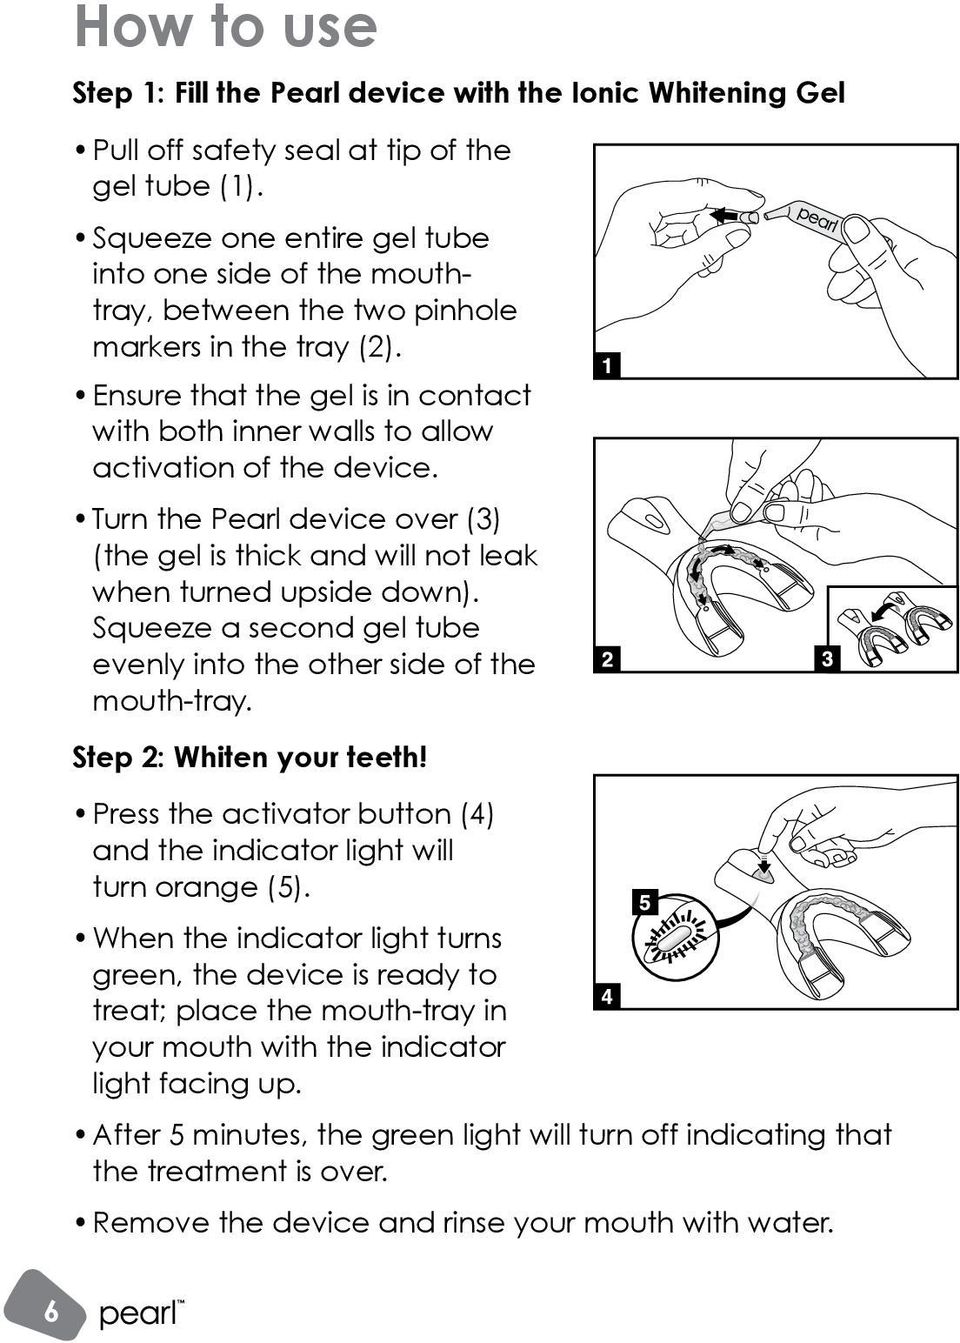 Turn the Pearl device over (3) (the gel is thick and will not leak when turned upside down). Squeeze a second gel tube evenly into the other side of the mouth-tray. Step 2: Whiten your teeth!